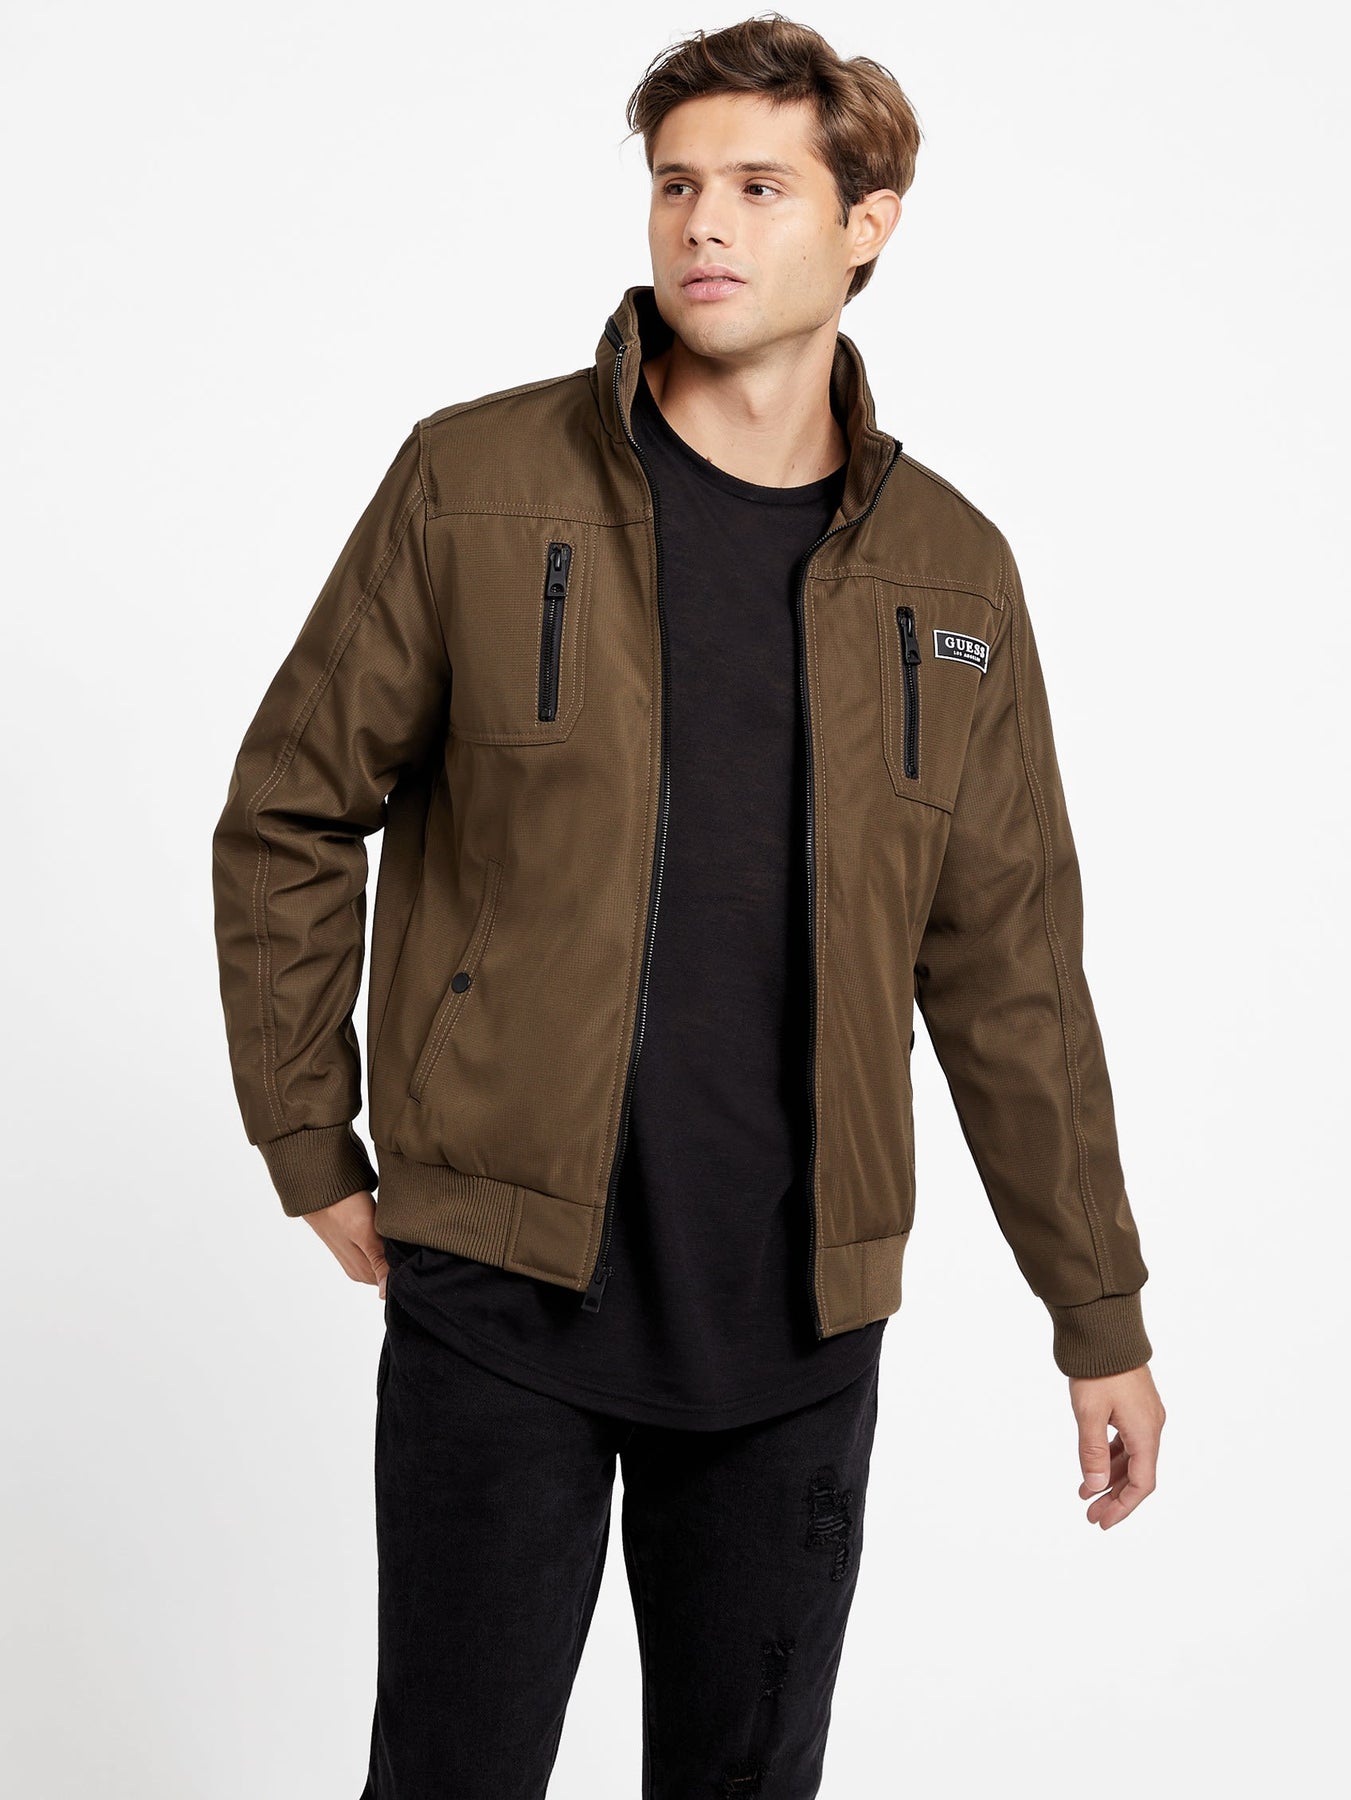 Guess Factory Eco Auggie Padded Jacket | Shop Premium Outlets